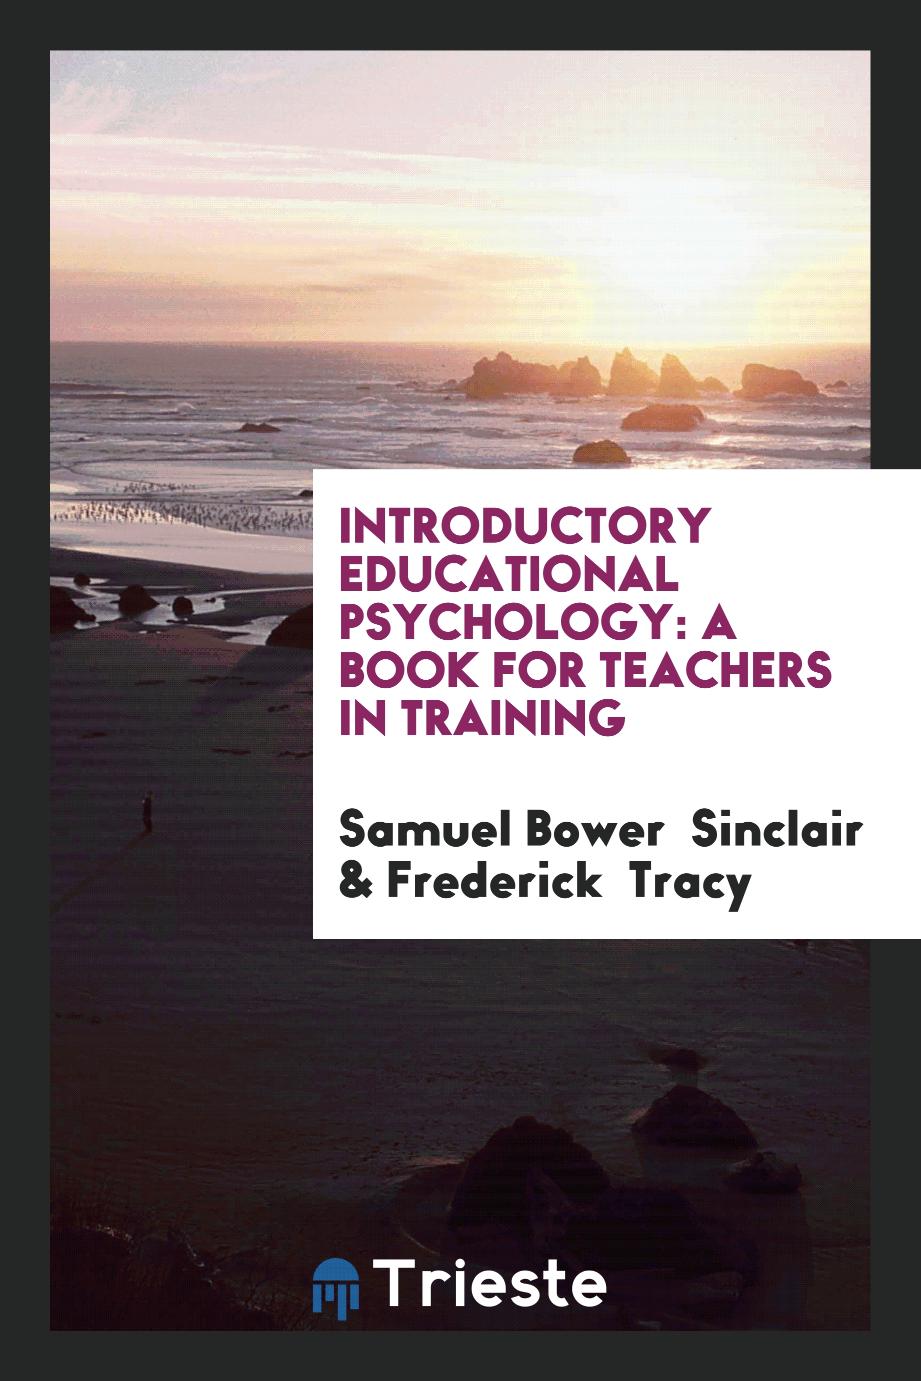 Introductory Educational Psychology: A Book for Teachers in Training